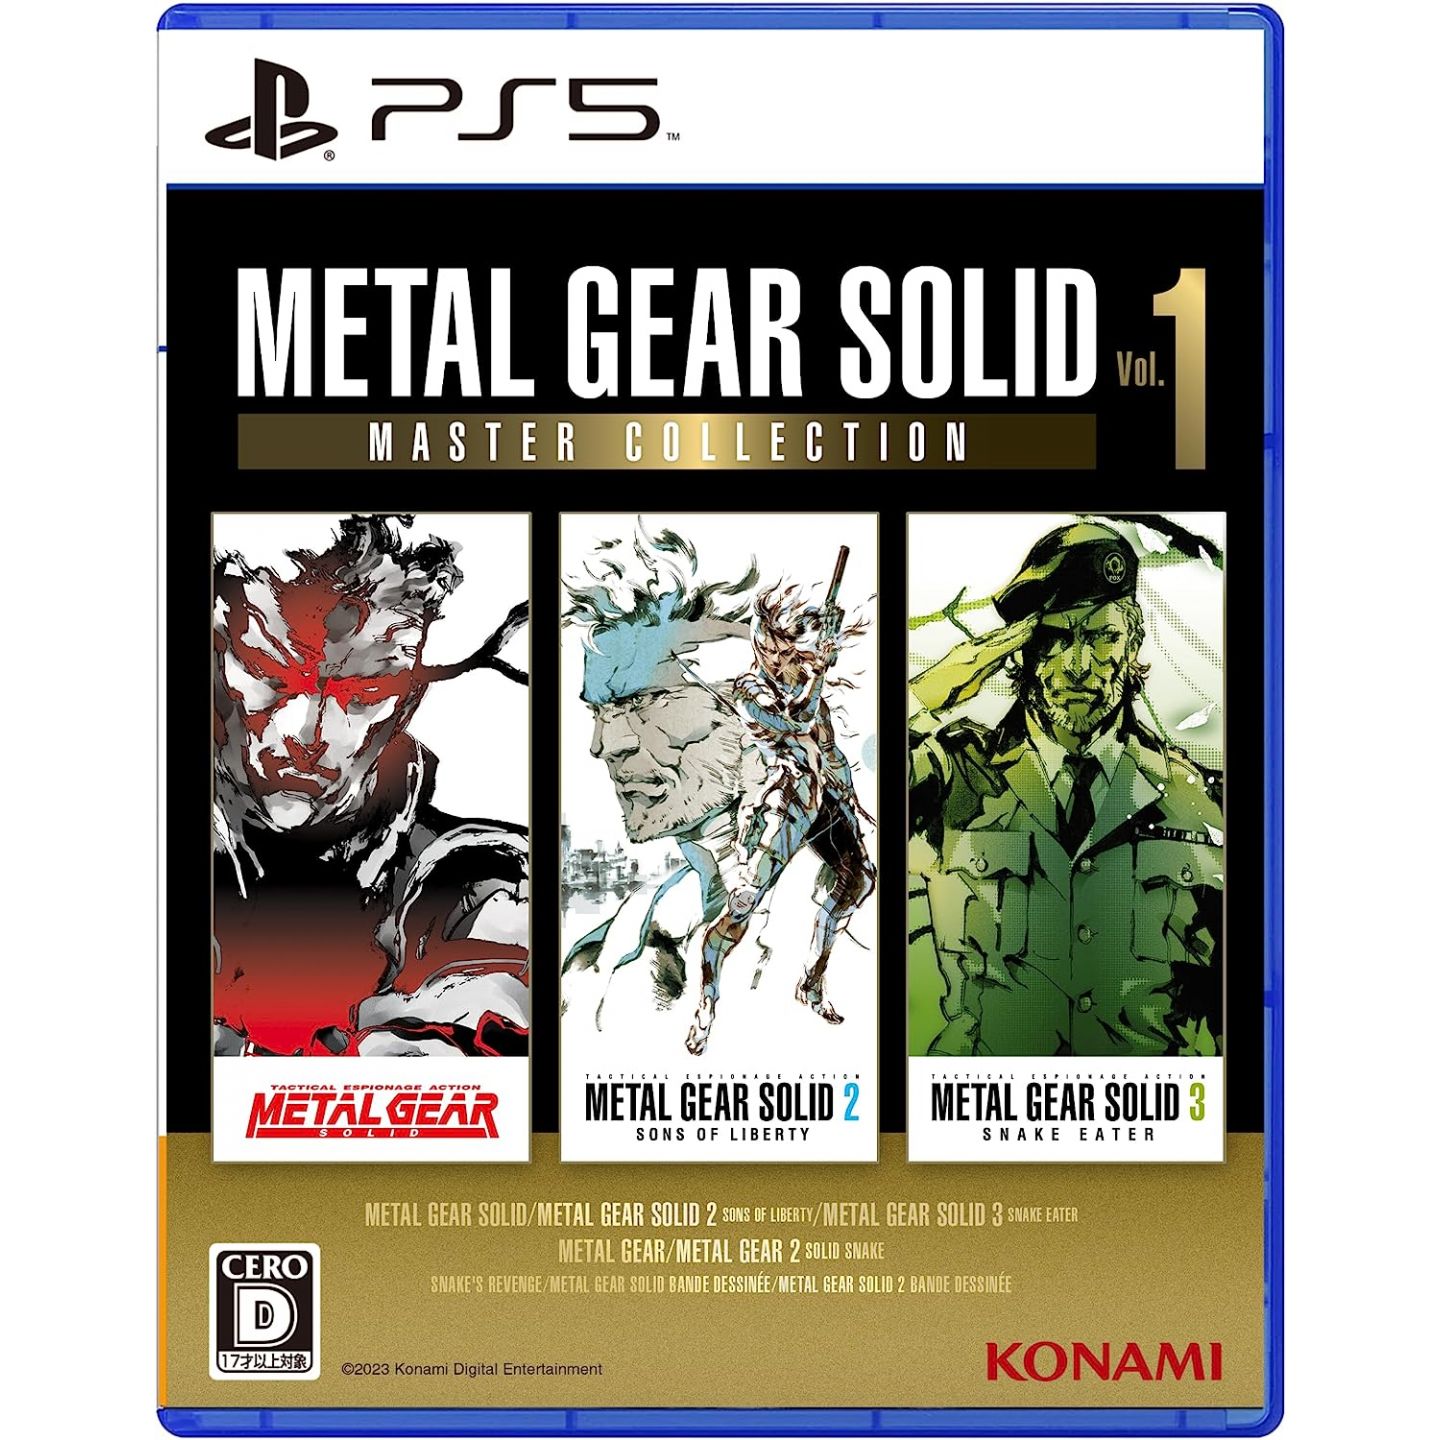 Metal Gear Solid: Master Collection 5 1 Sony Vol. Playstation 